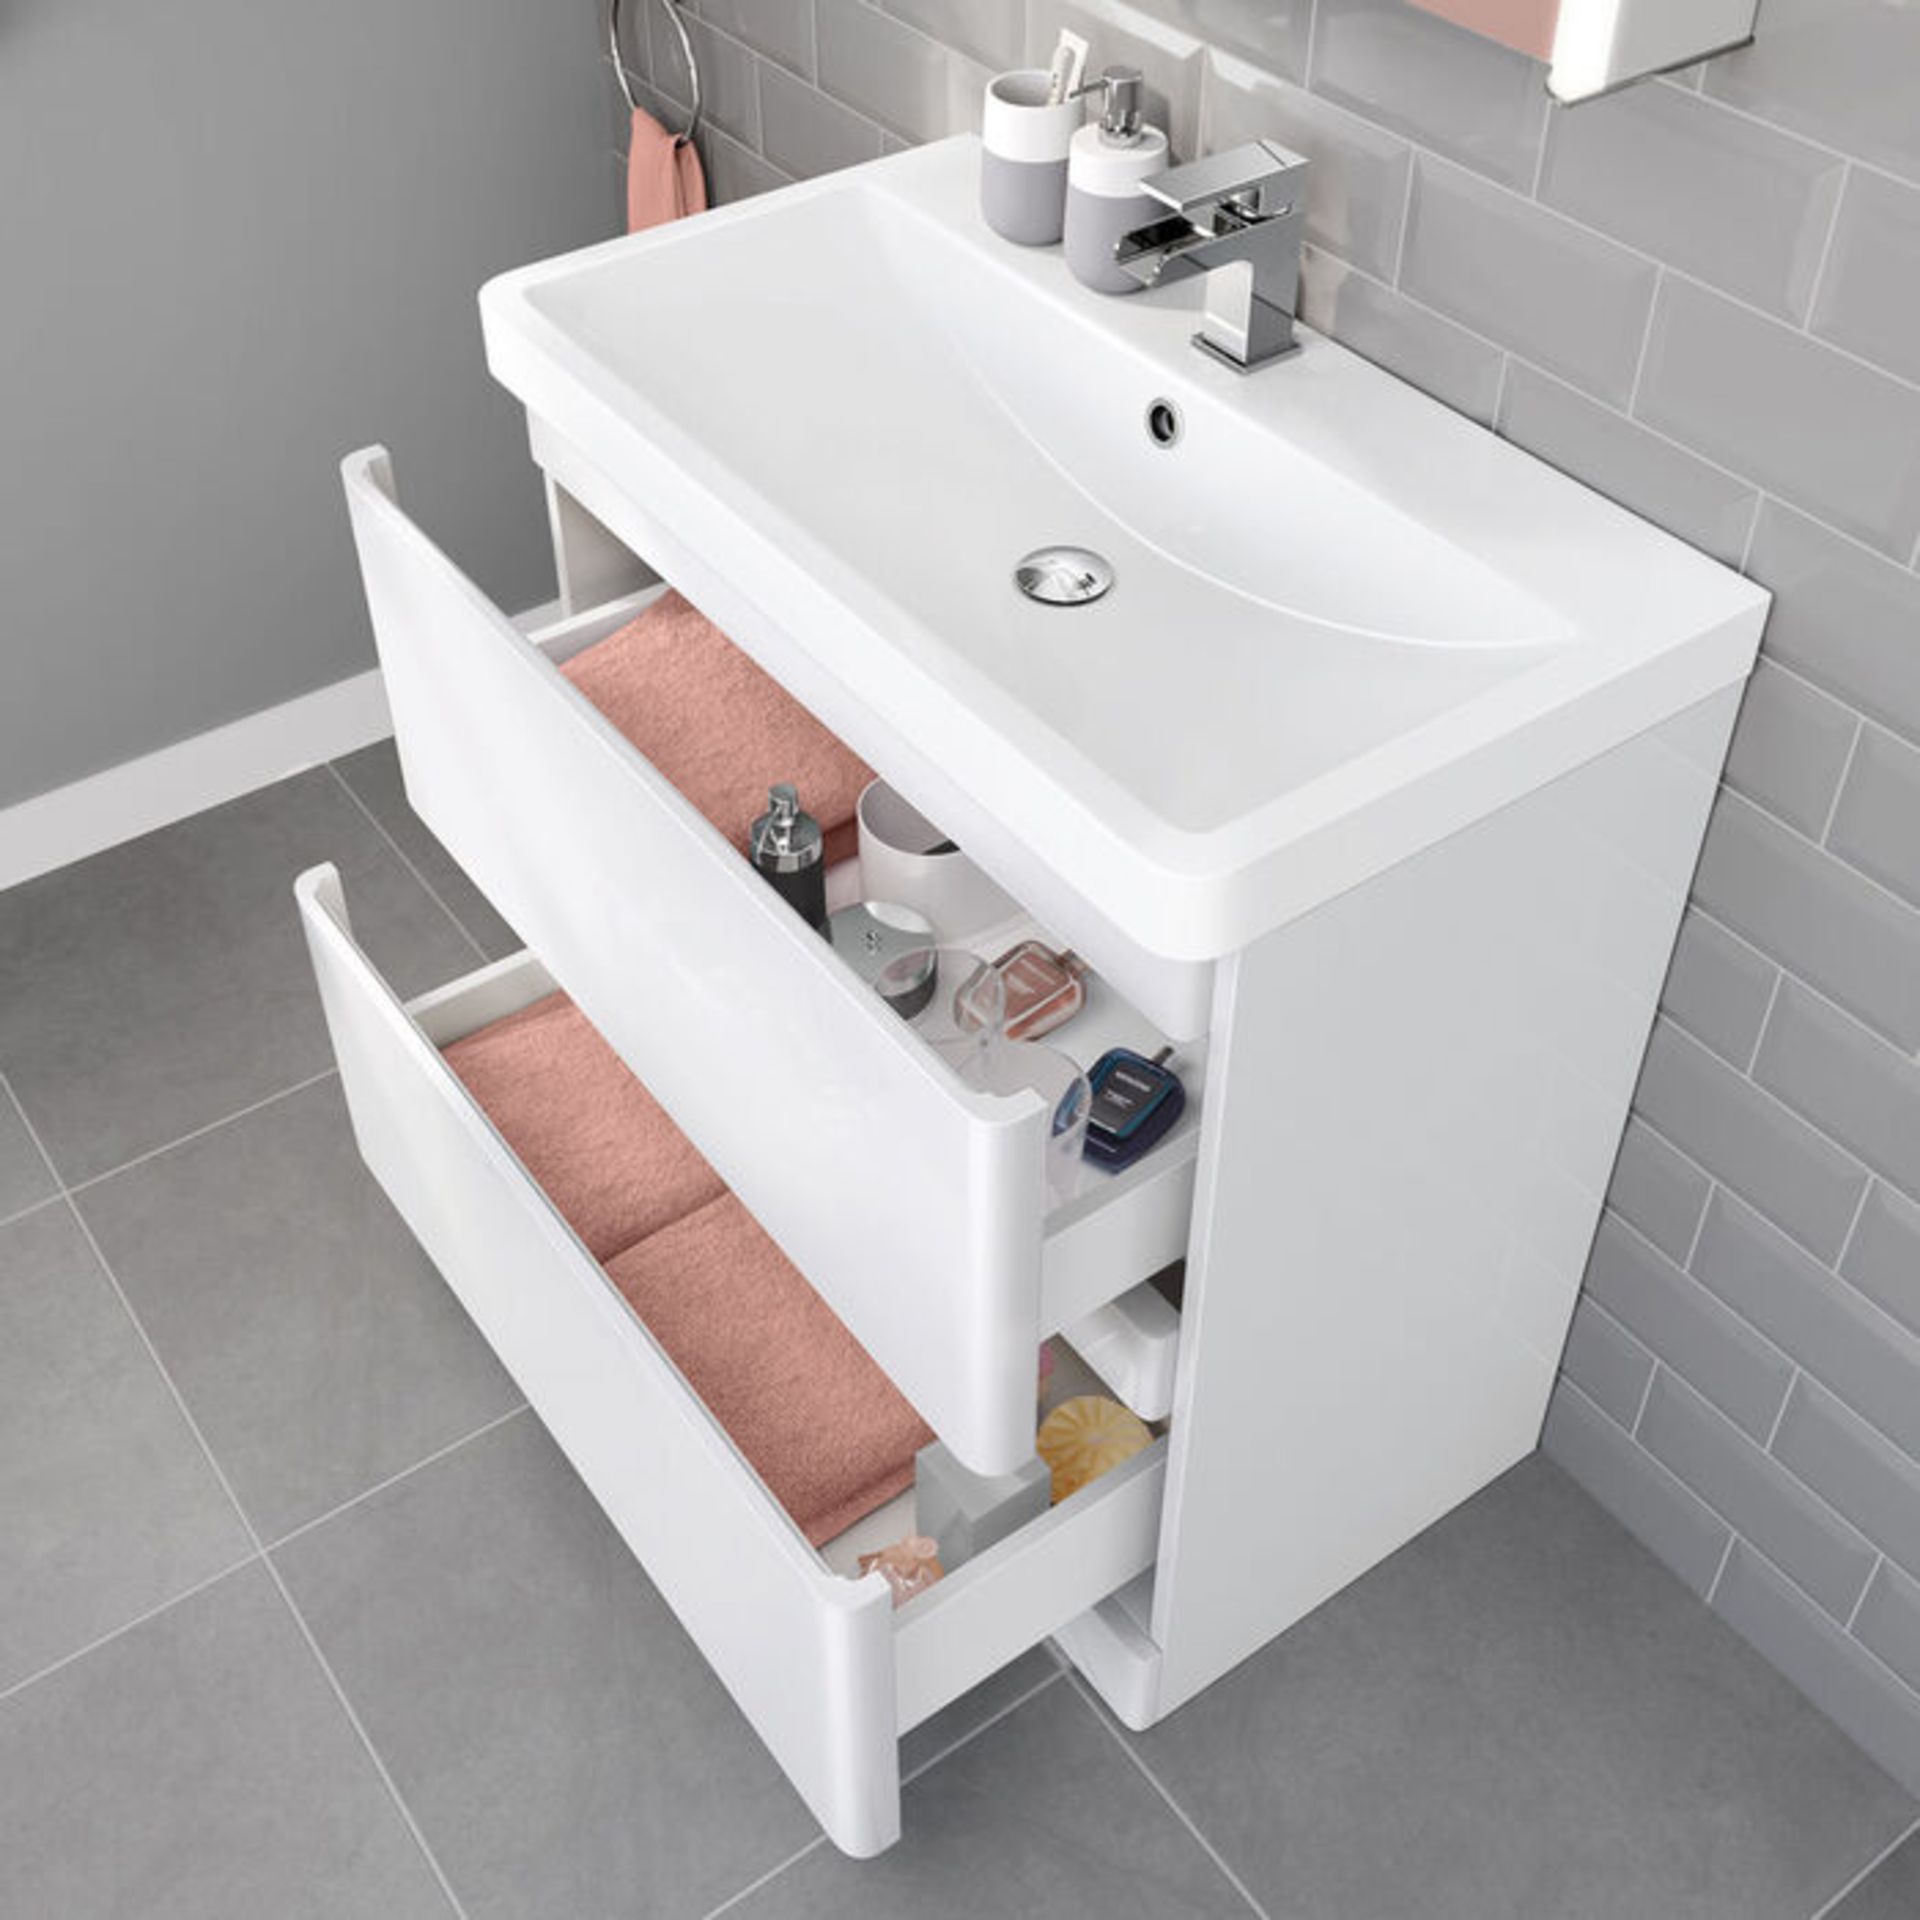 (CP29) 800mm Denver II Standing Cabinet High Gloss White + Washbasin. RRP £549.99. Comes compl... - Image 2 of 5